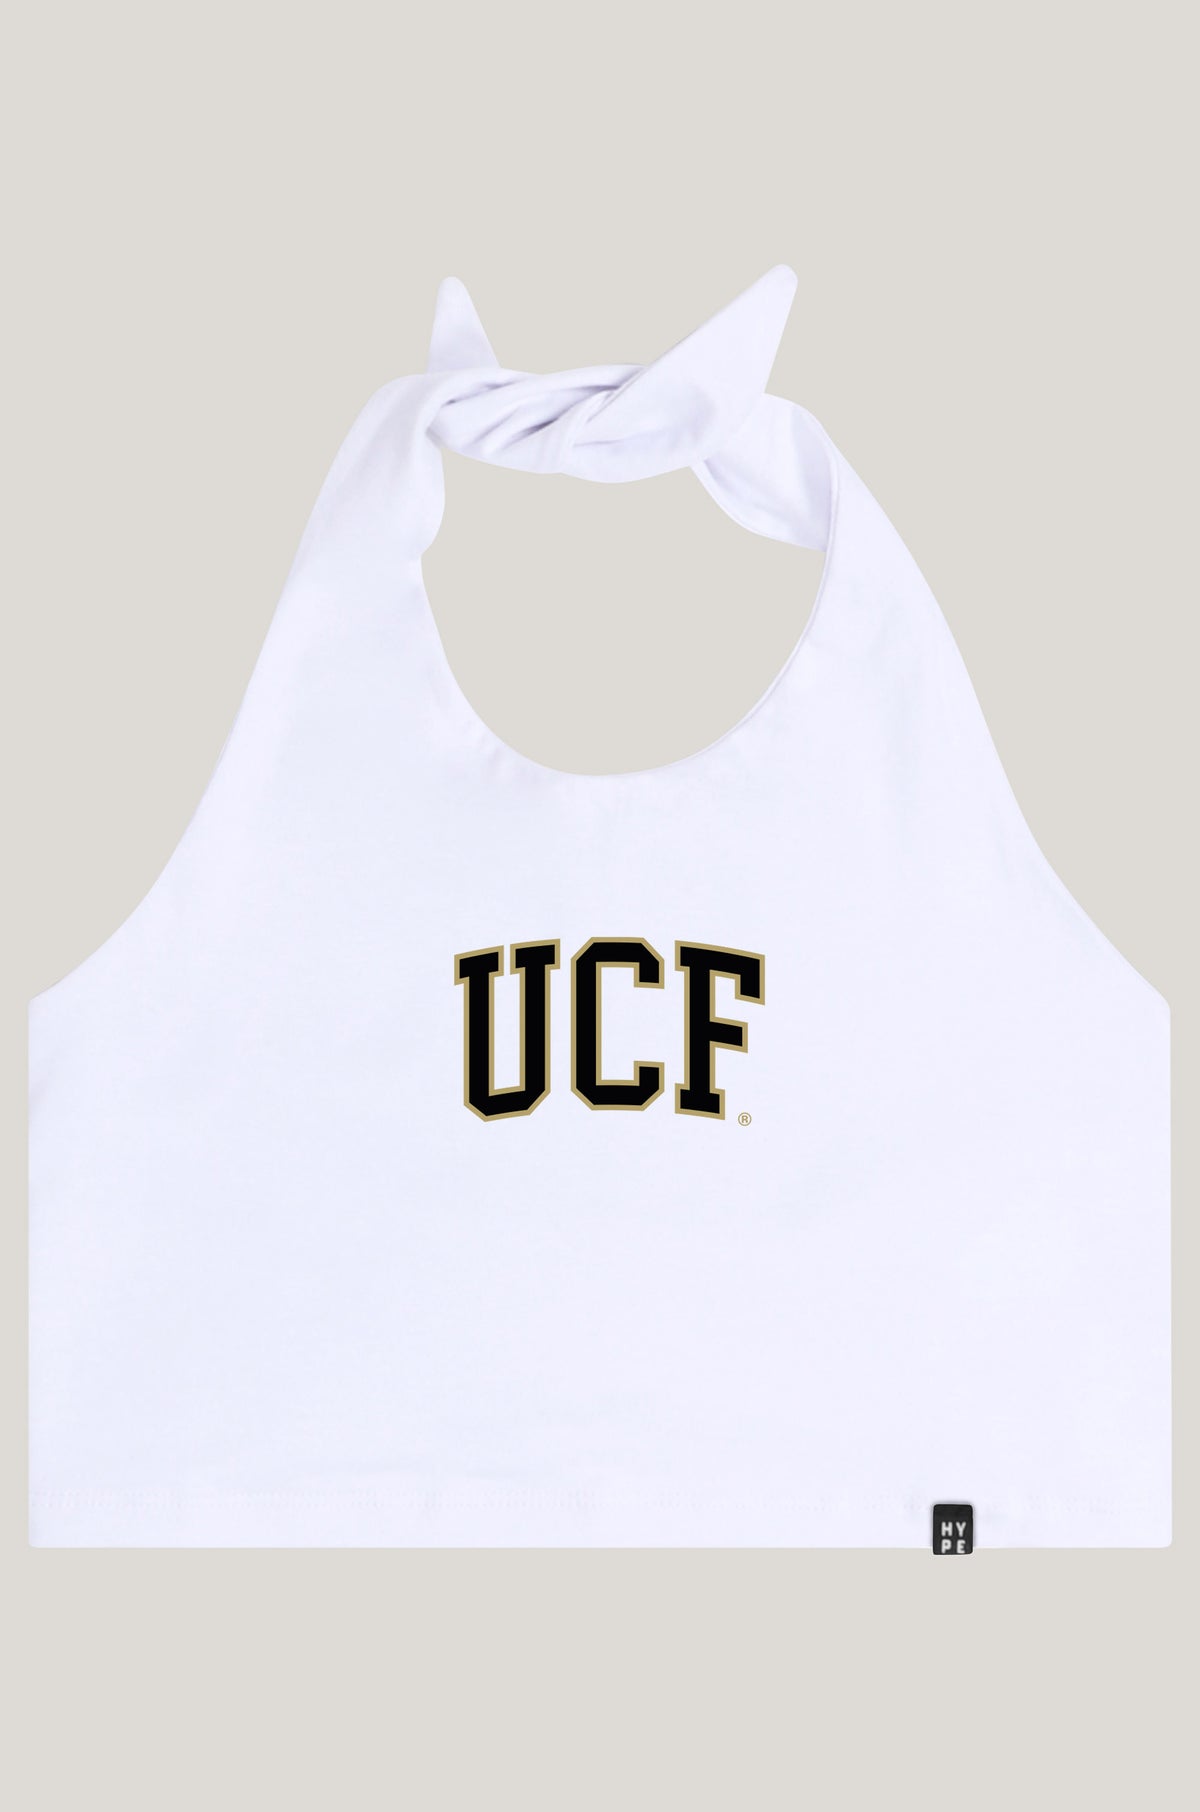 UCF Tailgate Top